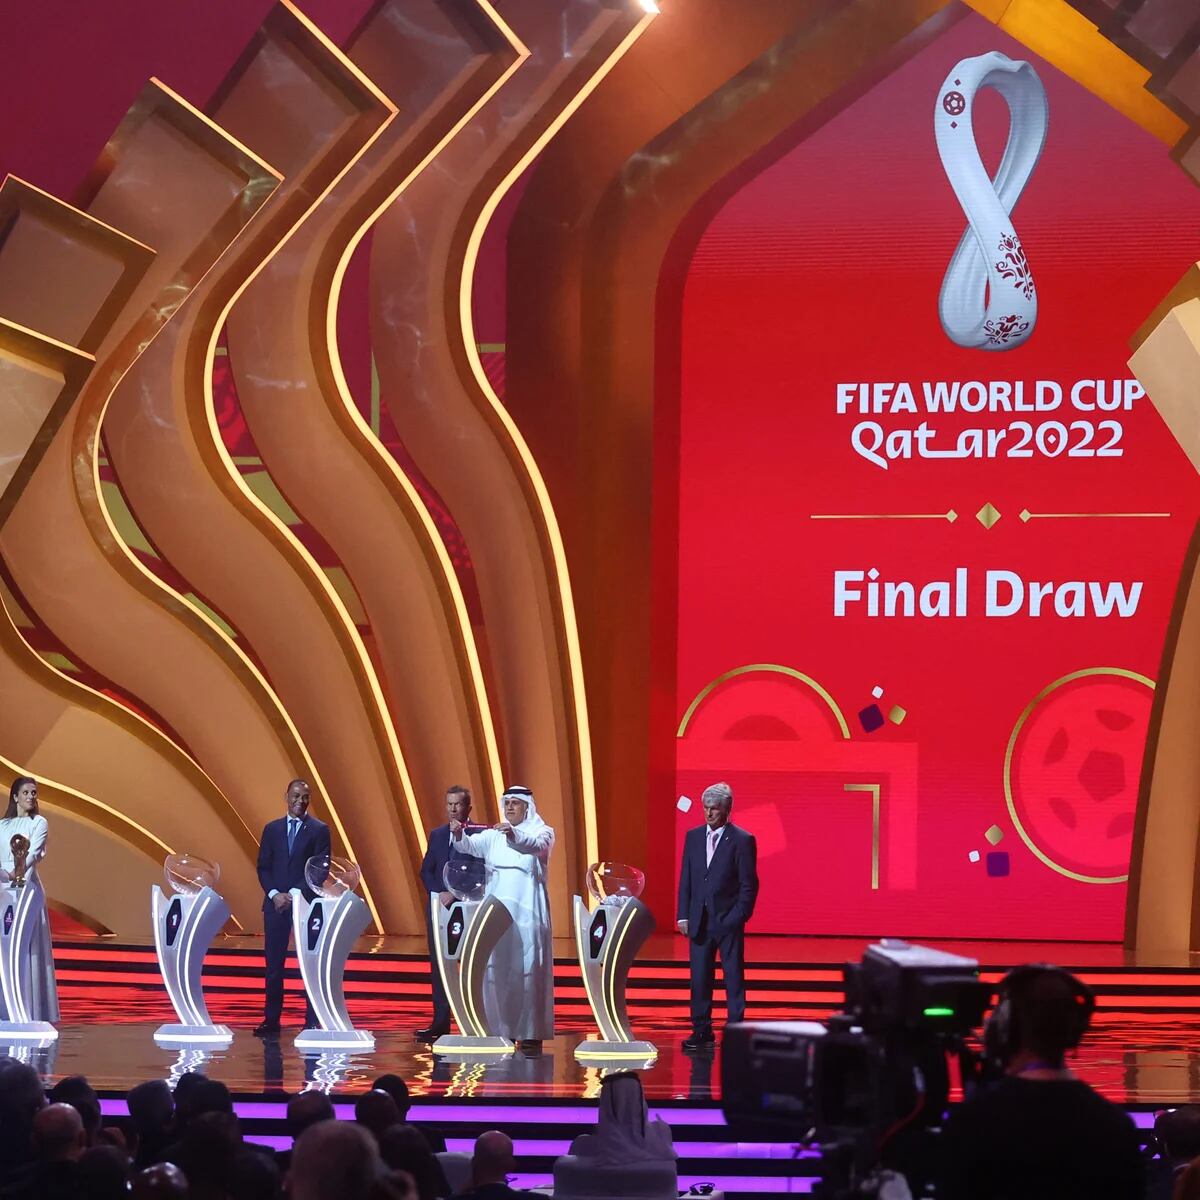 FIFA World Cup - Next stop: #FinalDraw Discover the groups on 1 April  #FIFAWorldCup